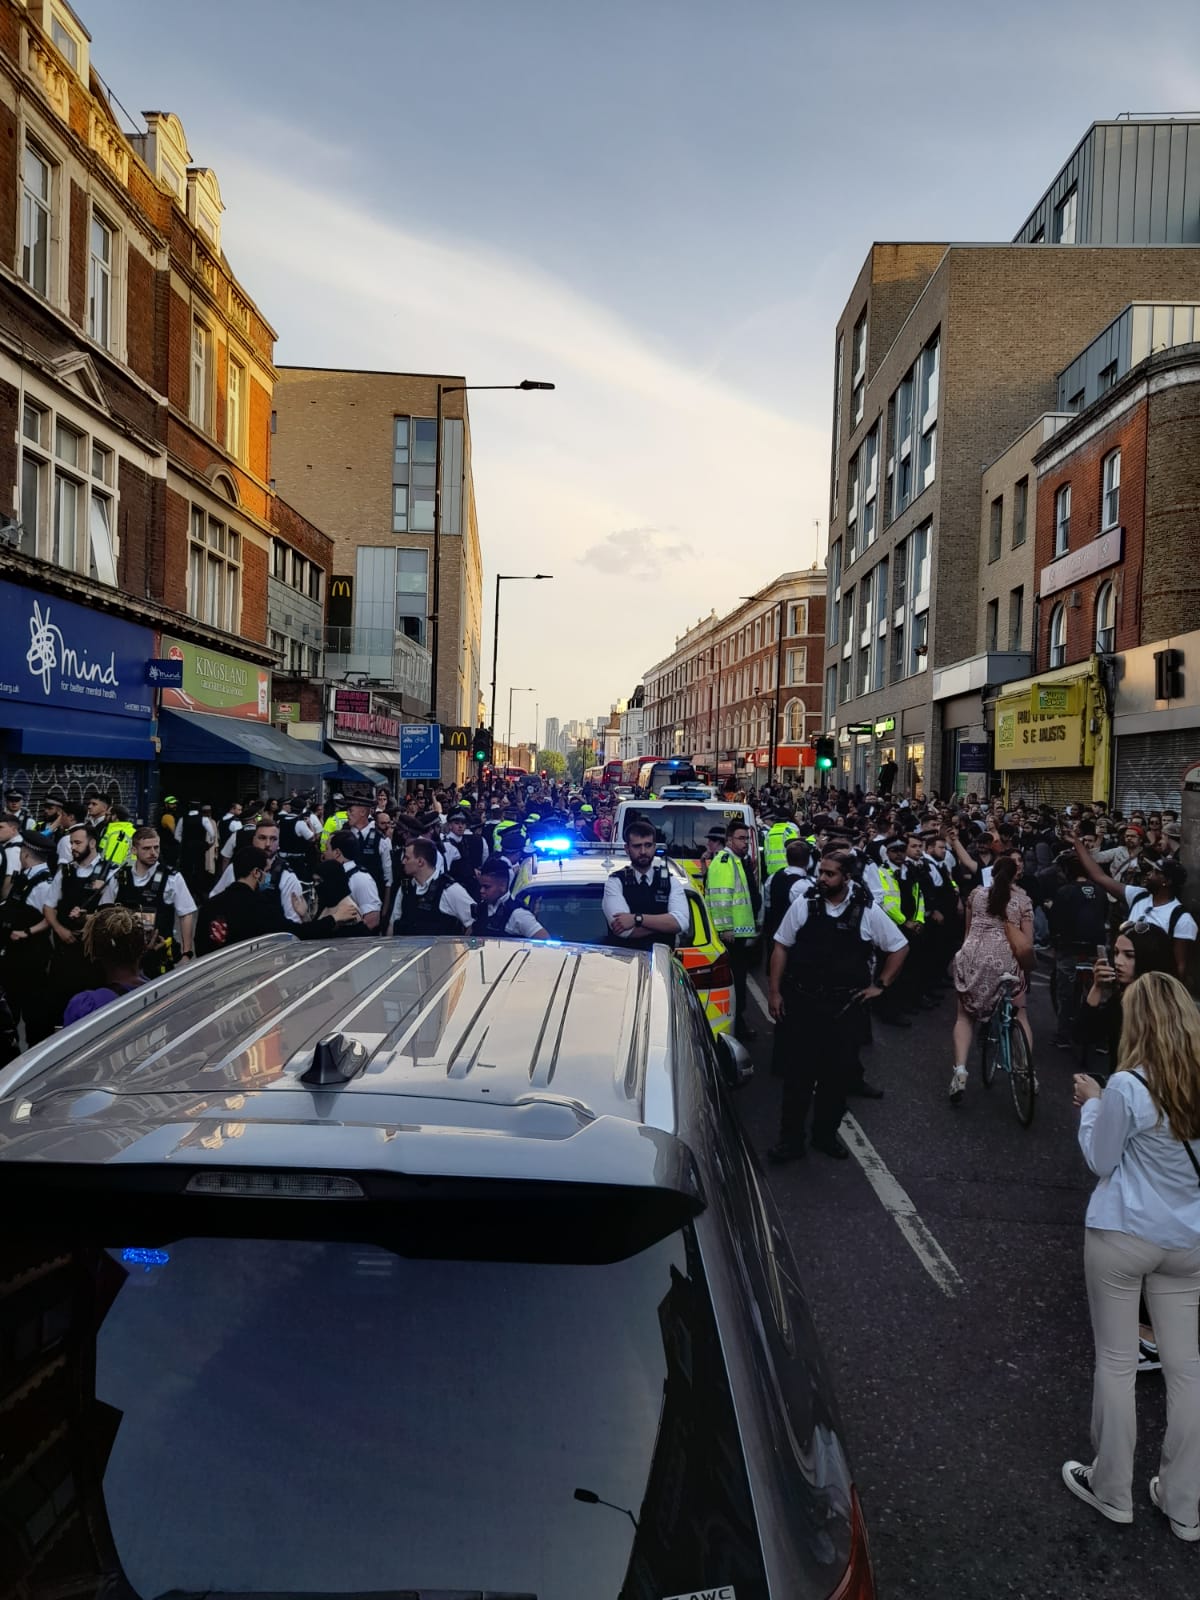 Officers clashed with scores of protesters in east London